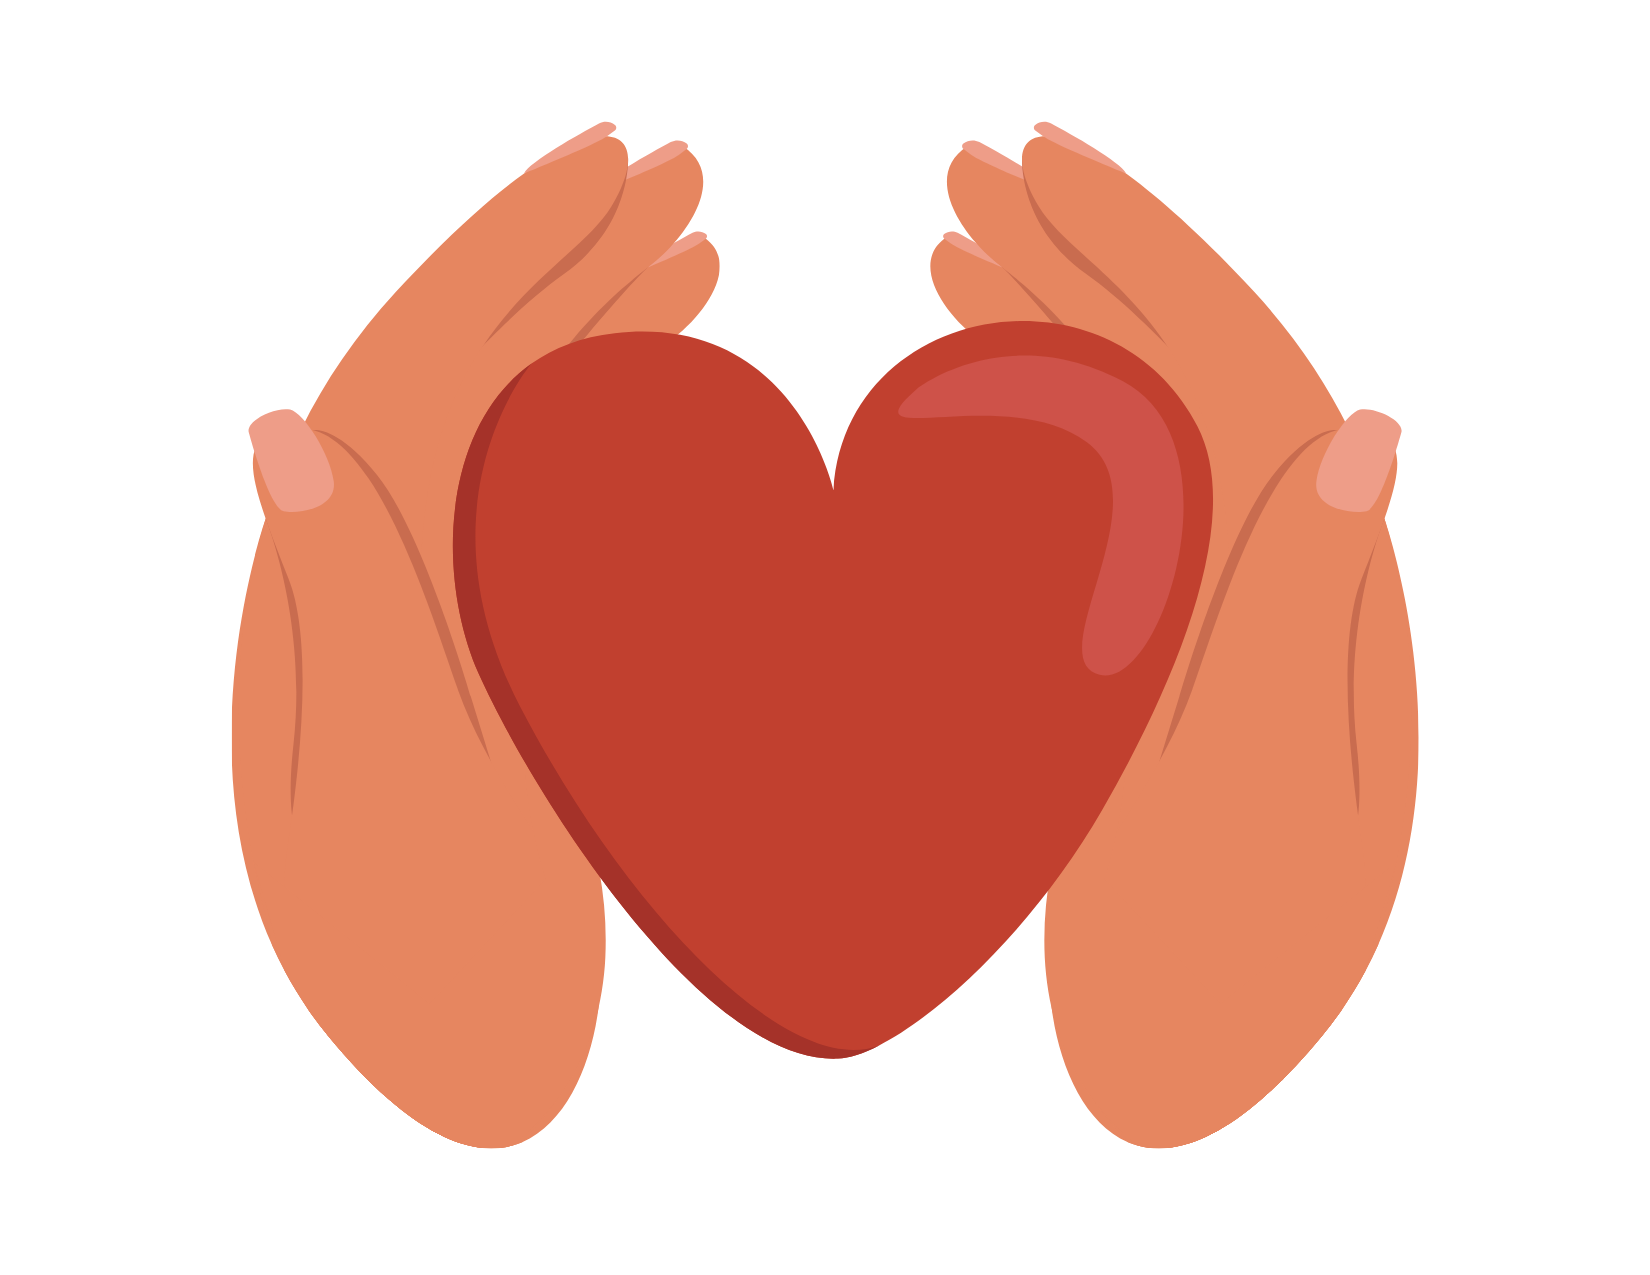 illustrated image of hands cupping a heart